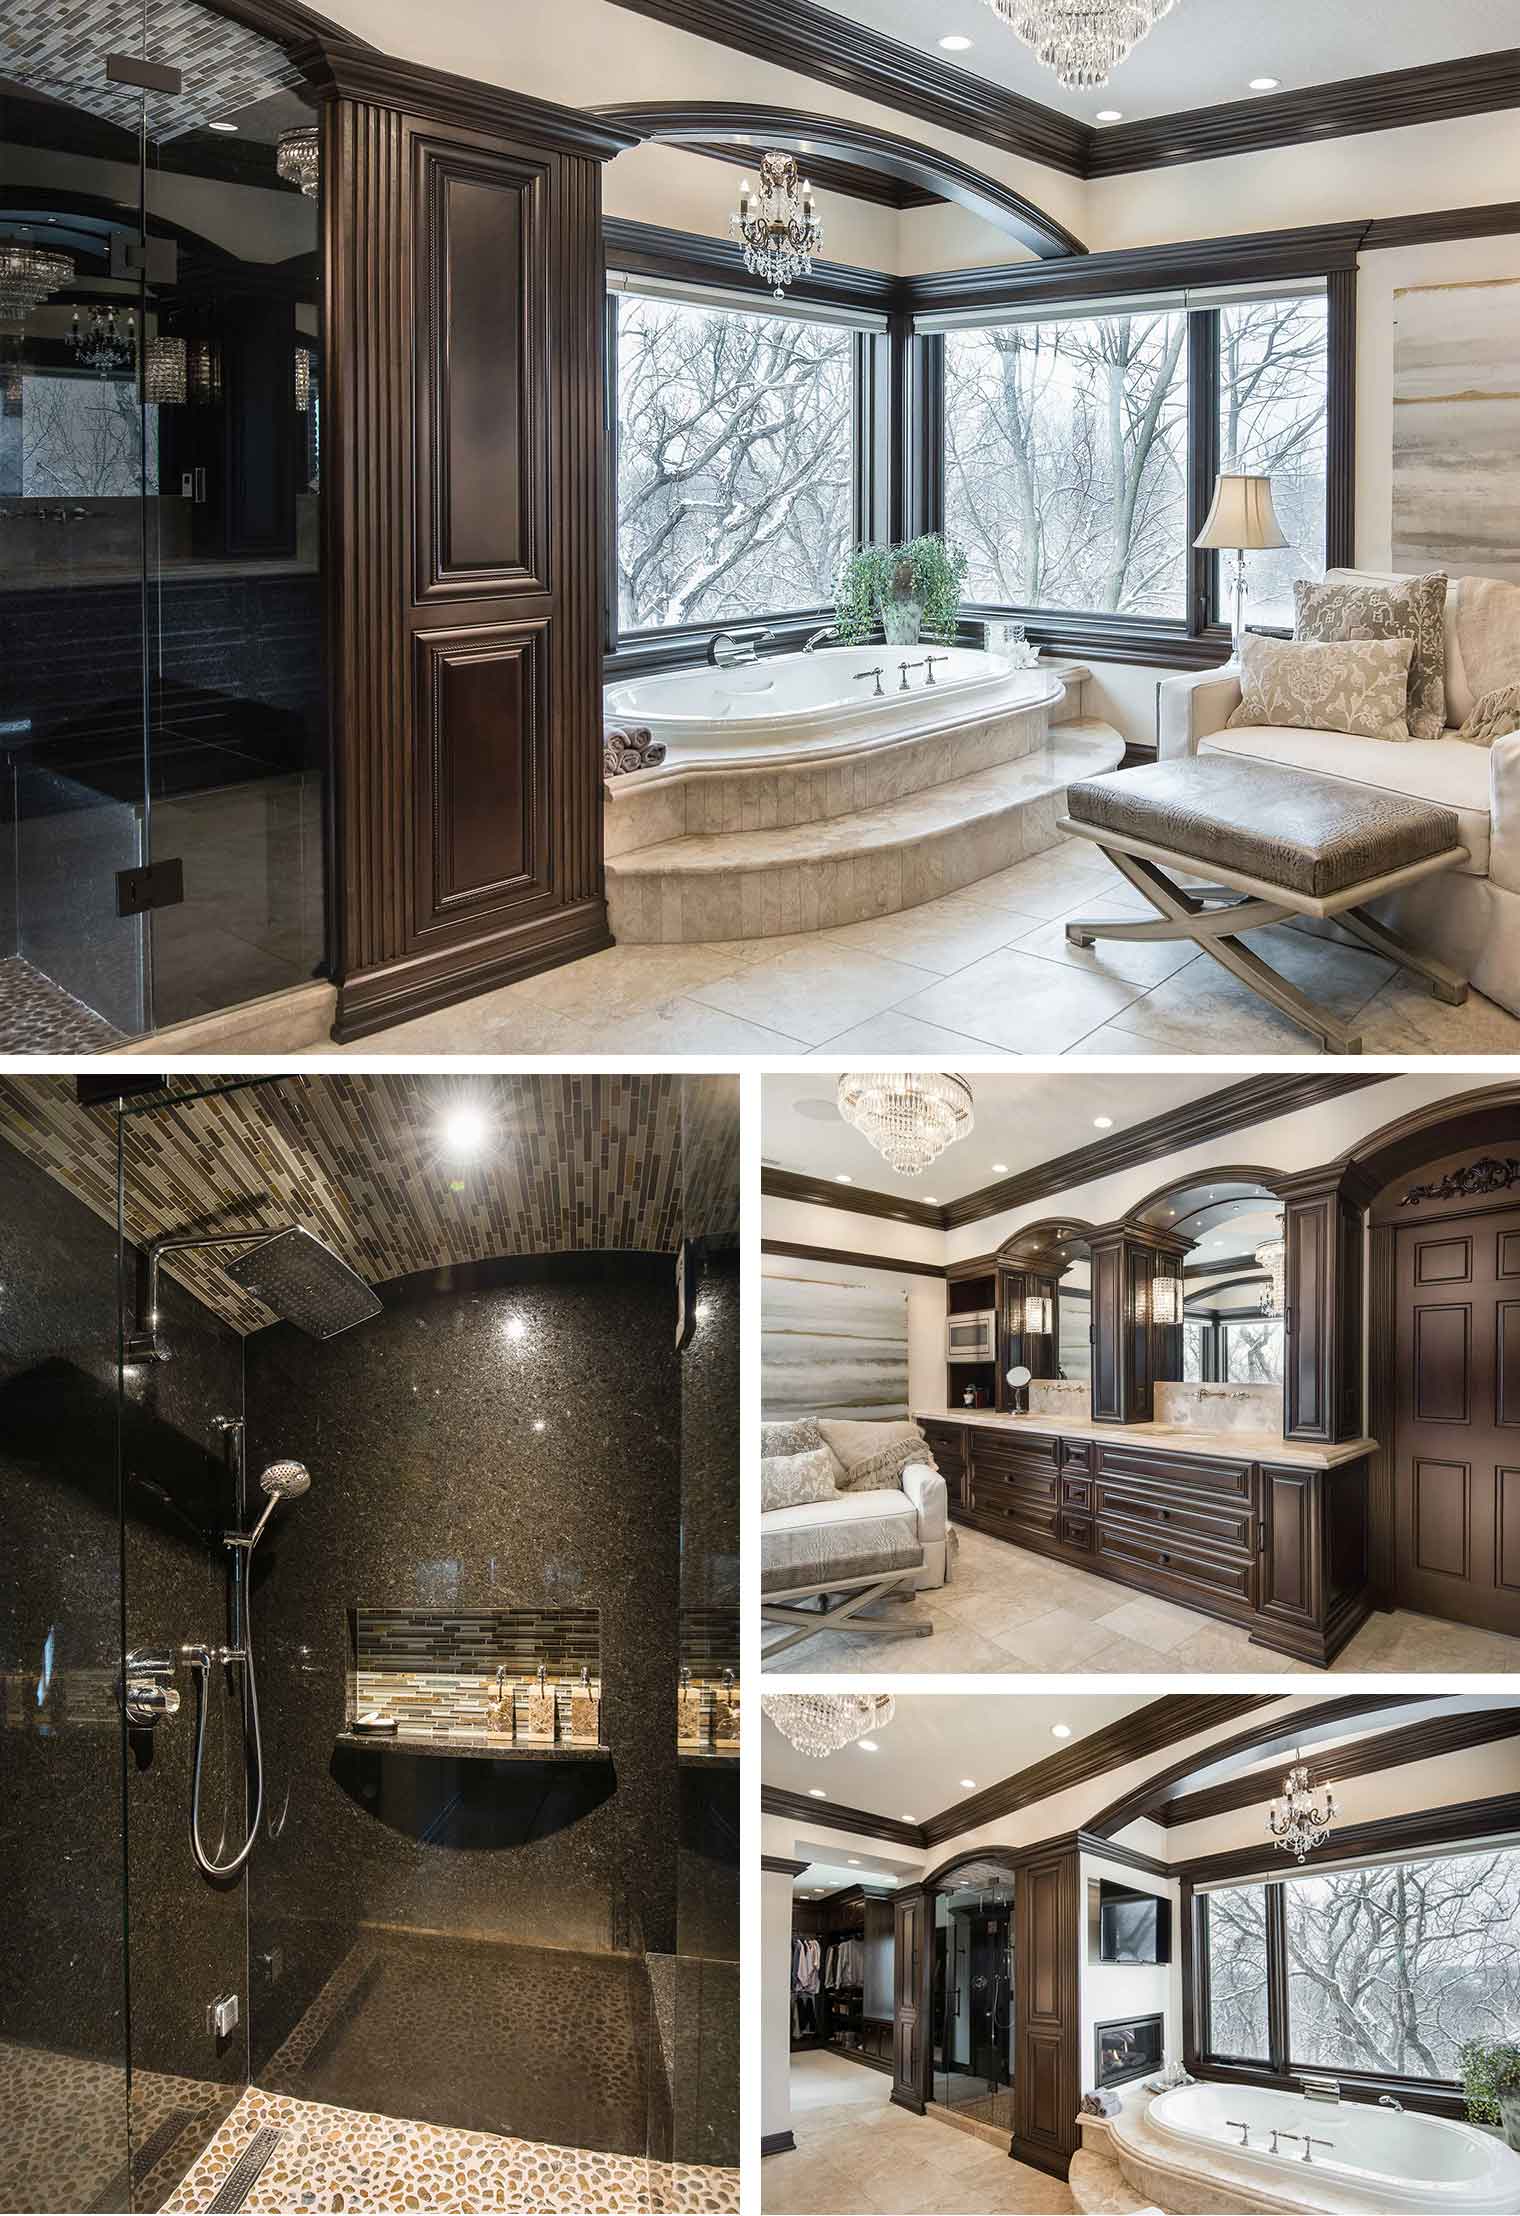 This Urbandale, Iowa master suite renovation features custom cherry woodwork, travertine countertops, elegant arches, a TV and fireplace near the soaking tub and a natural stone steam shower. Designed and built by Silent Rivers of Des Moines